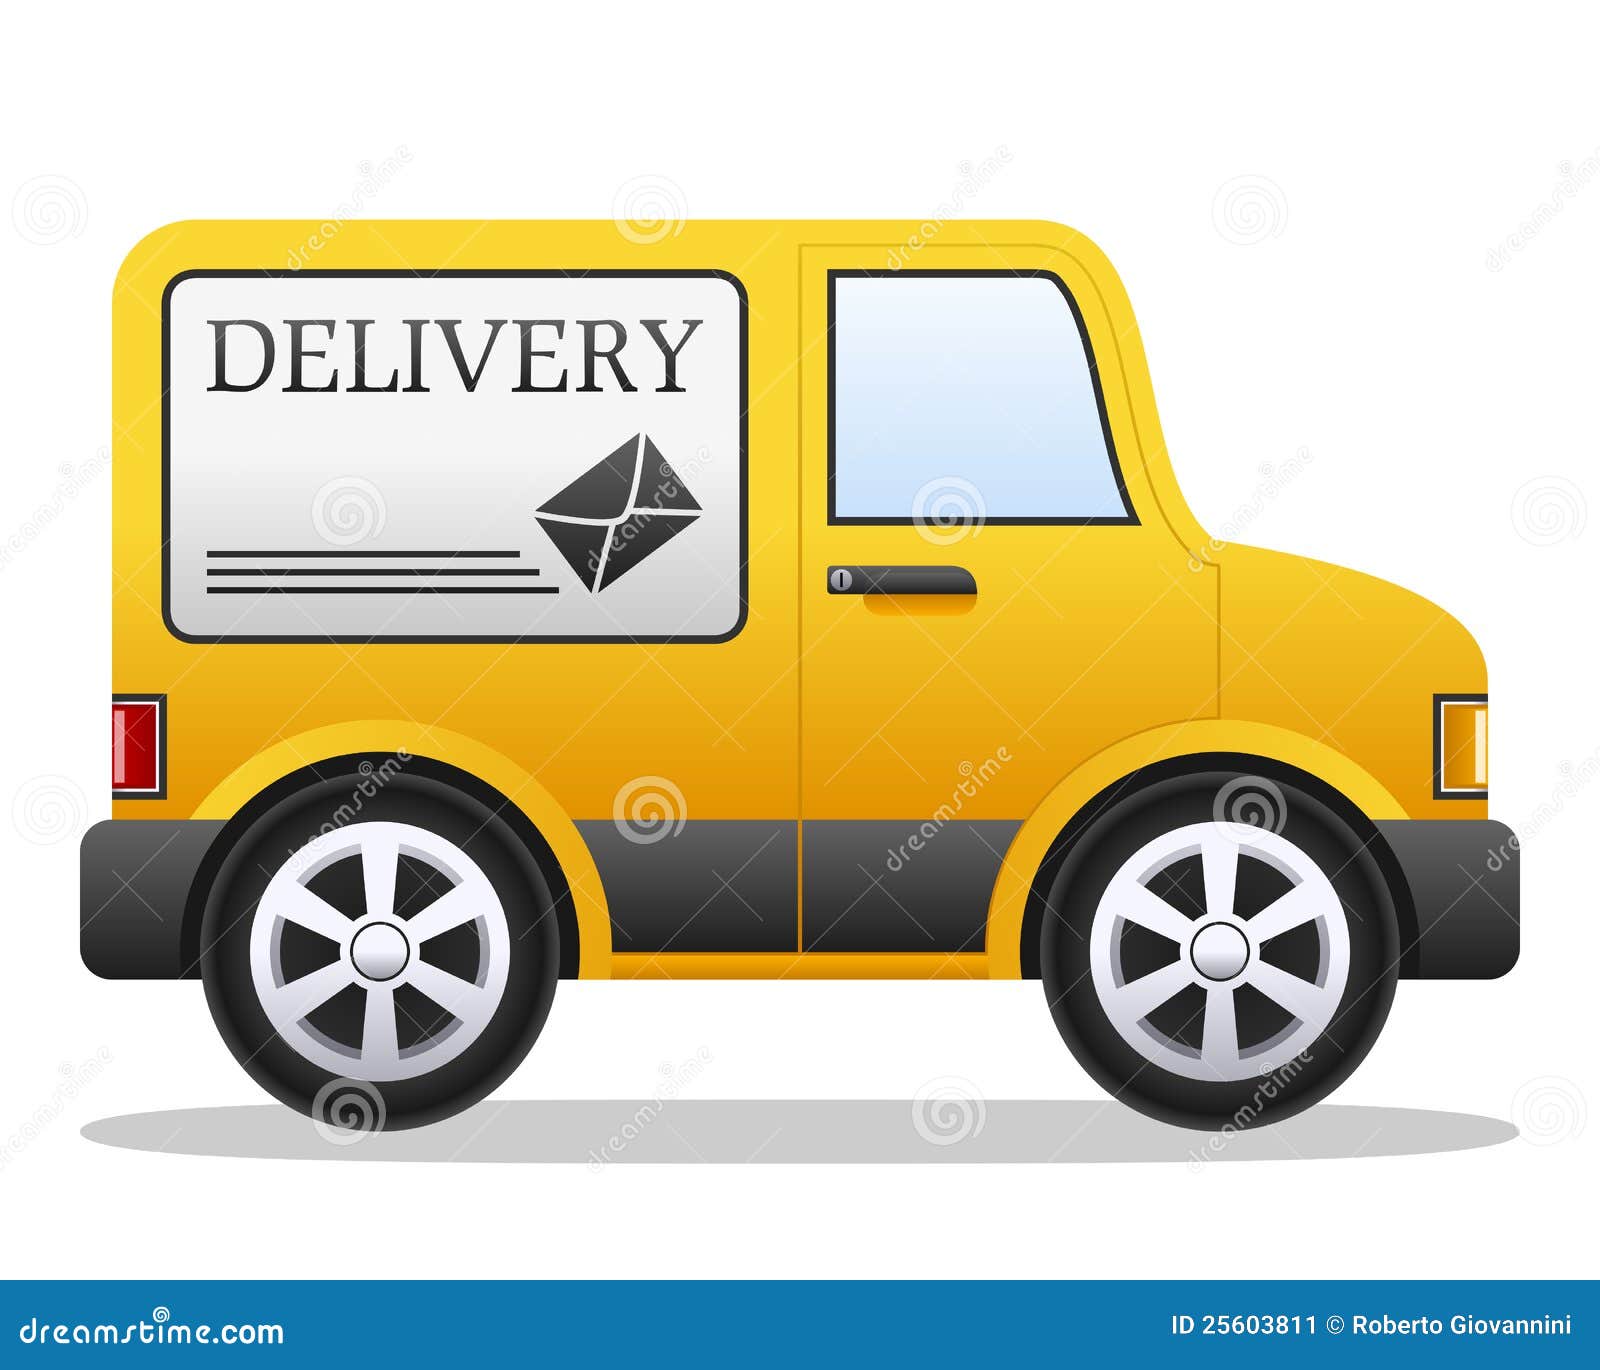 delivery driver clipart - photo #17